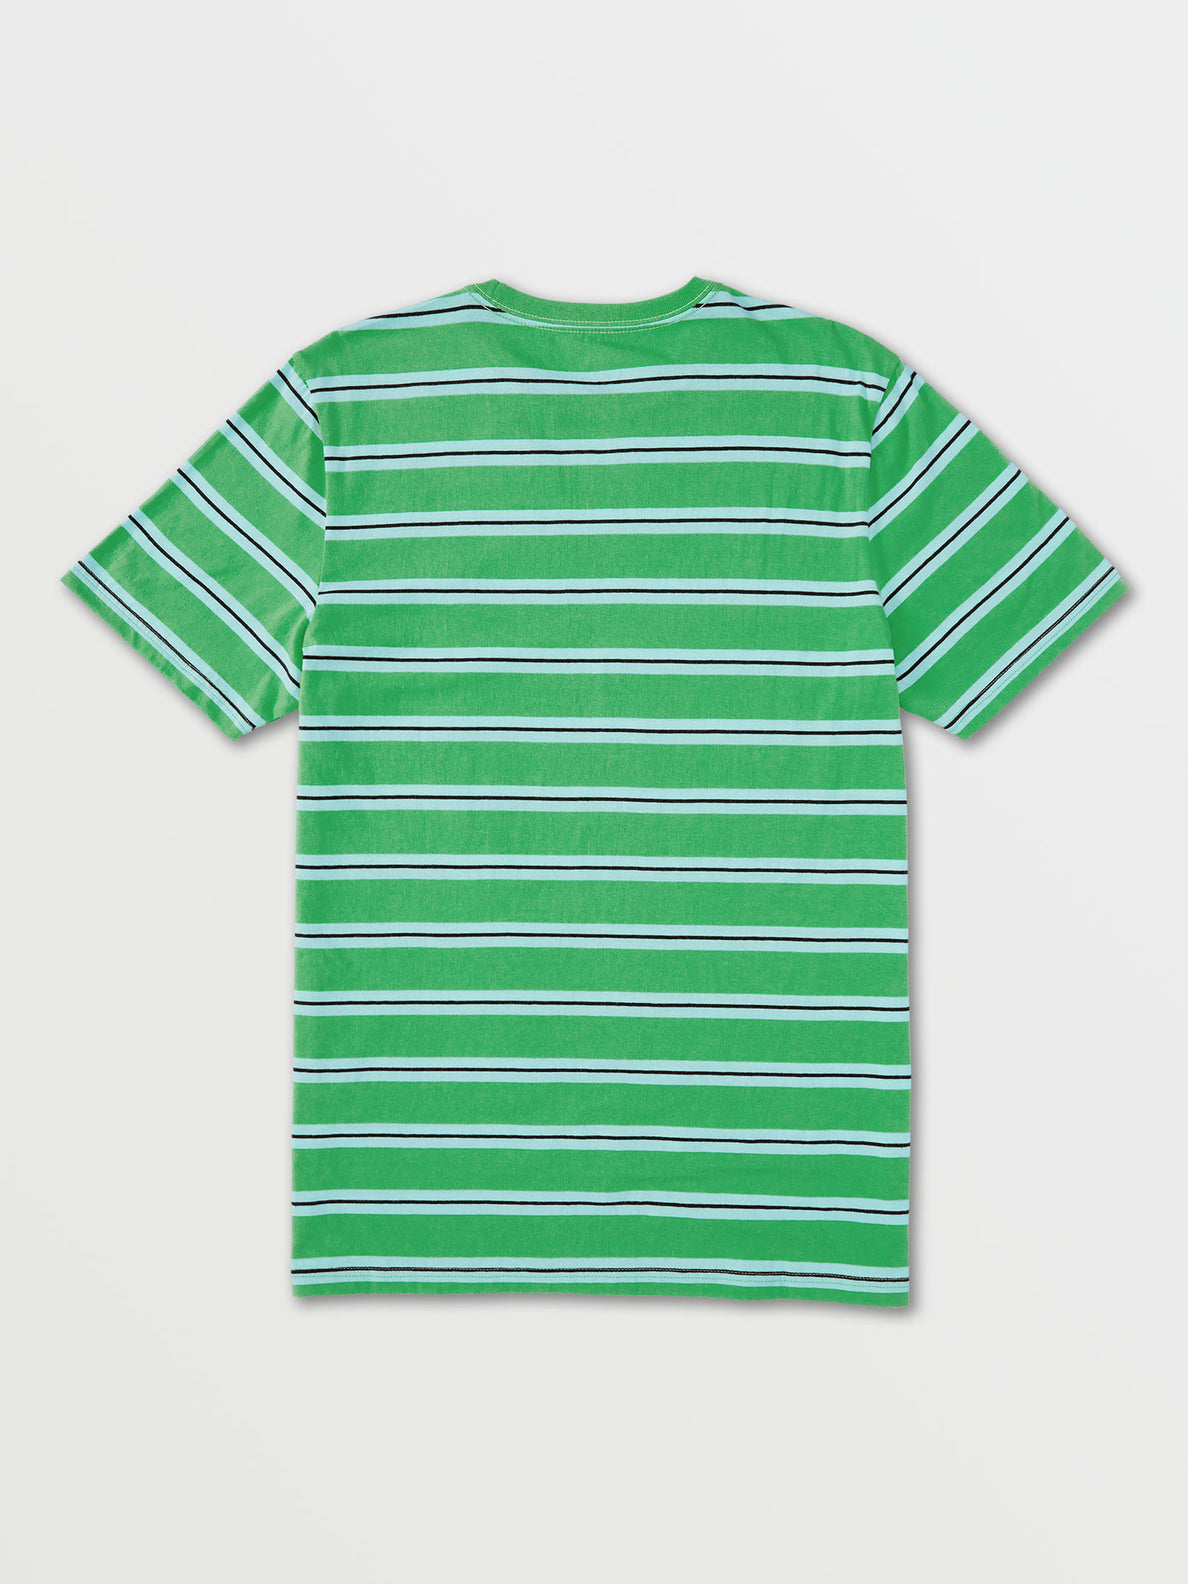 Parables Stripes Crew Tee - Poison Green (A0102100_PNG) [B]